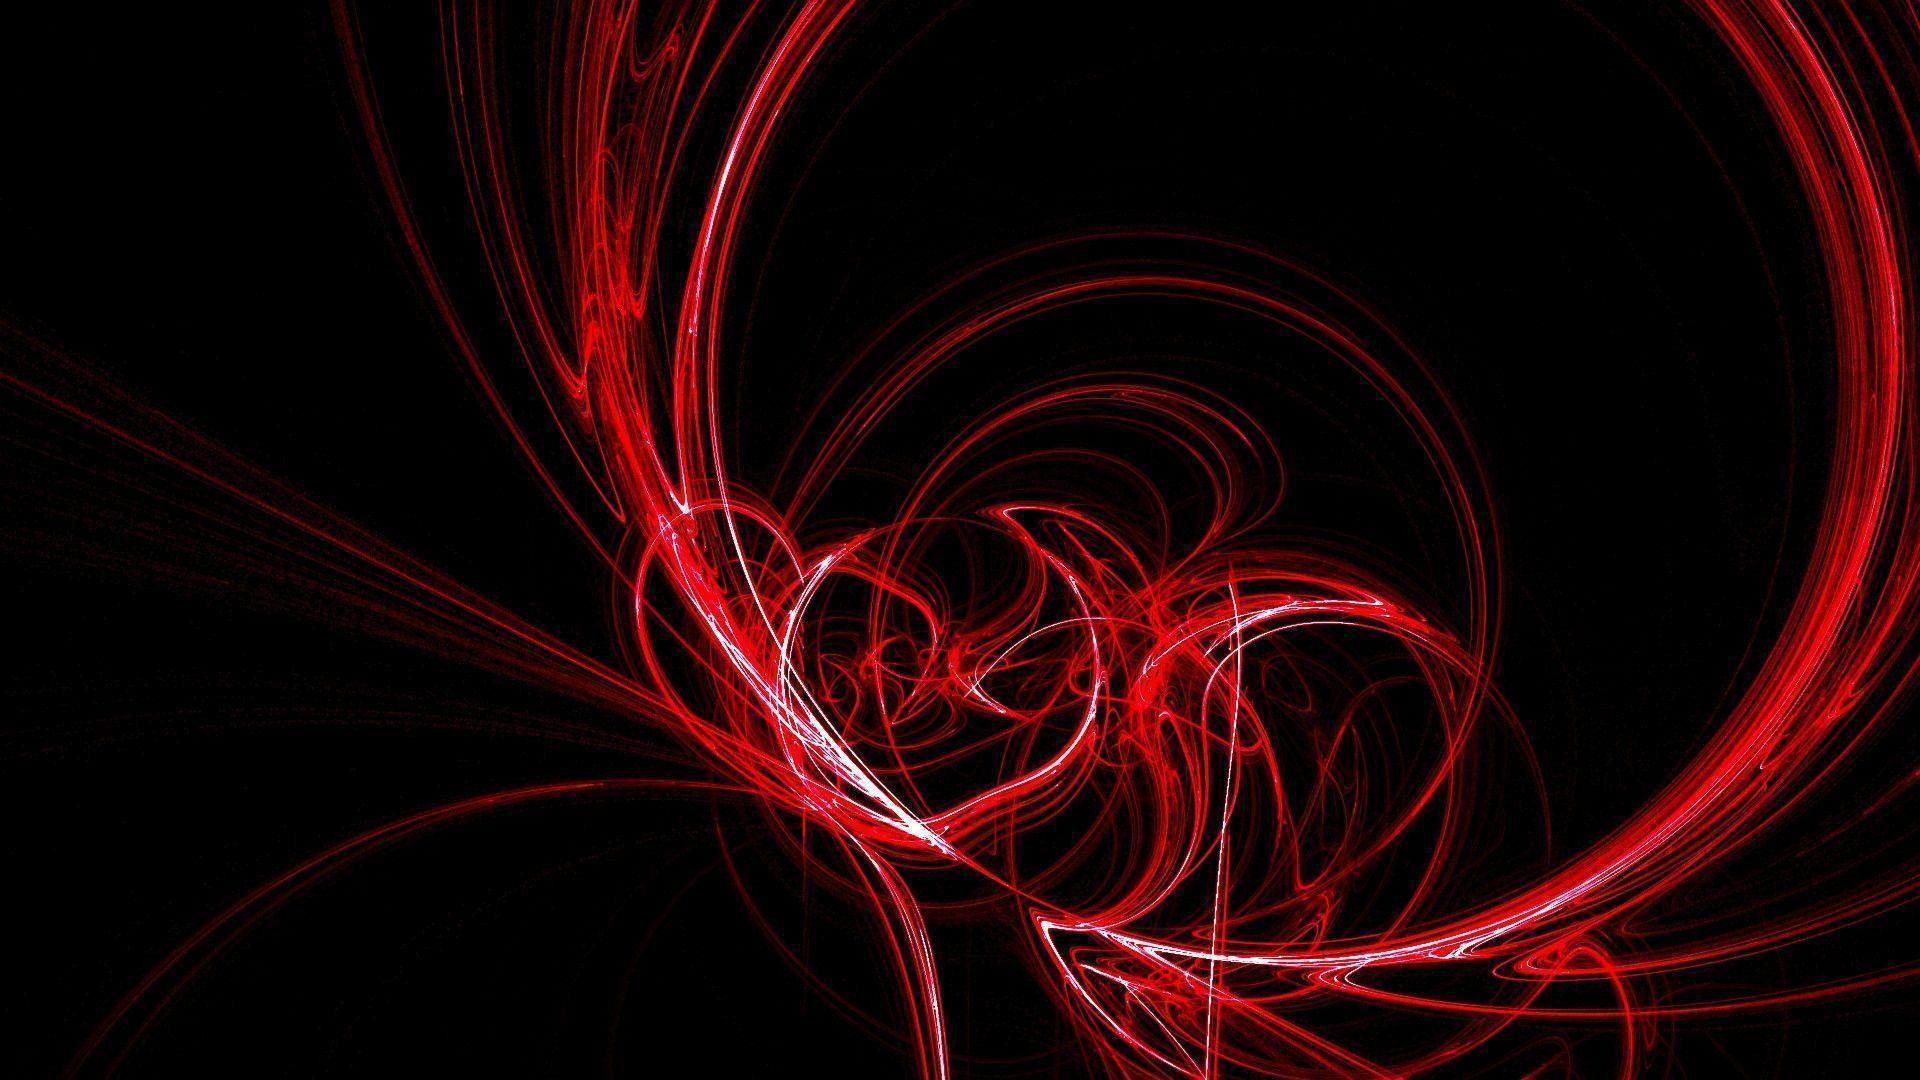 Black And Red Abstract Background 14760 Full HD Wallpaper Desktop